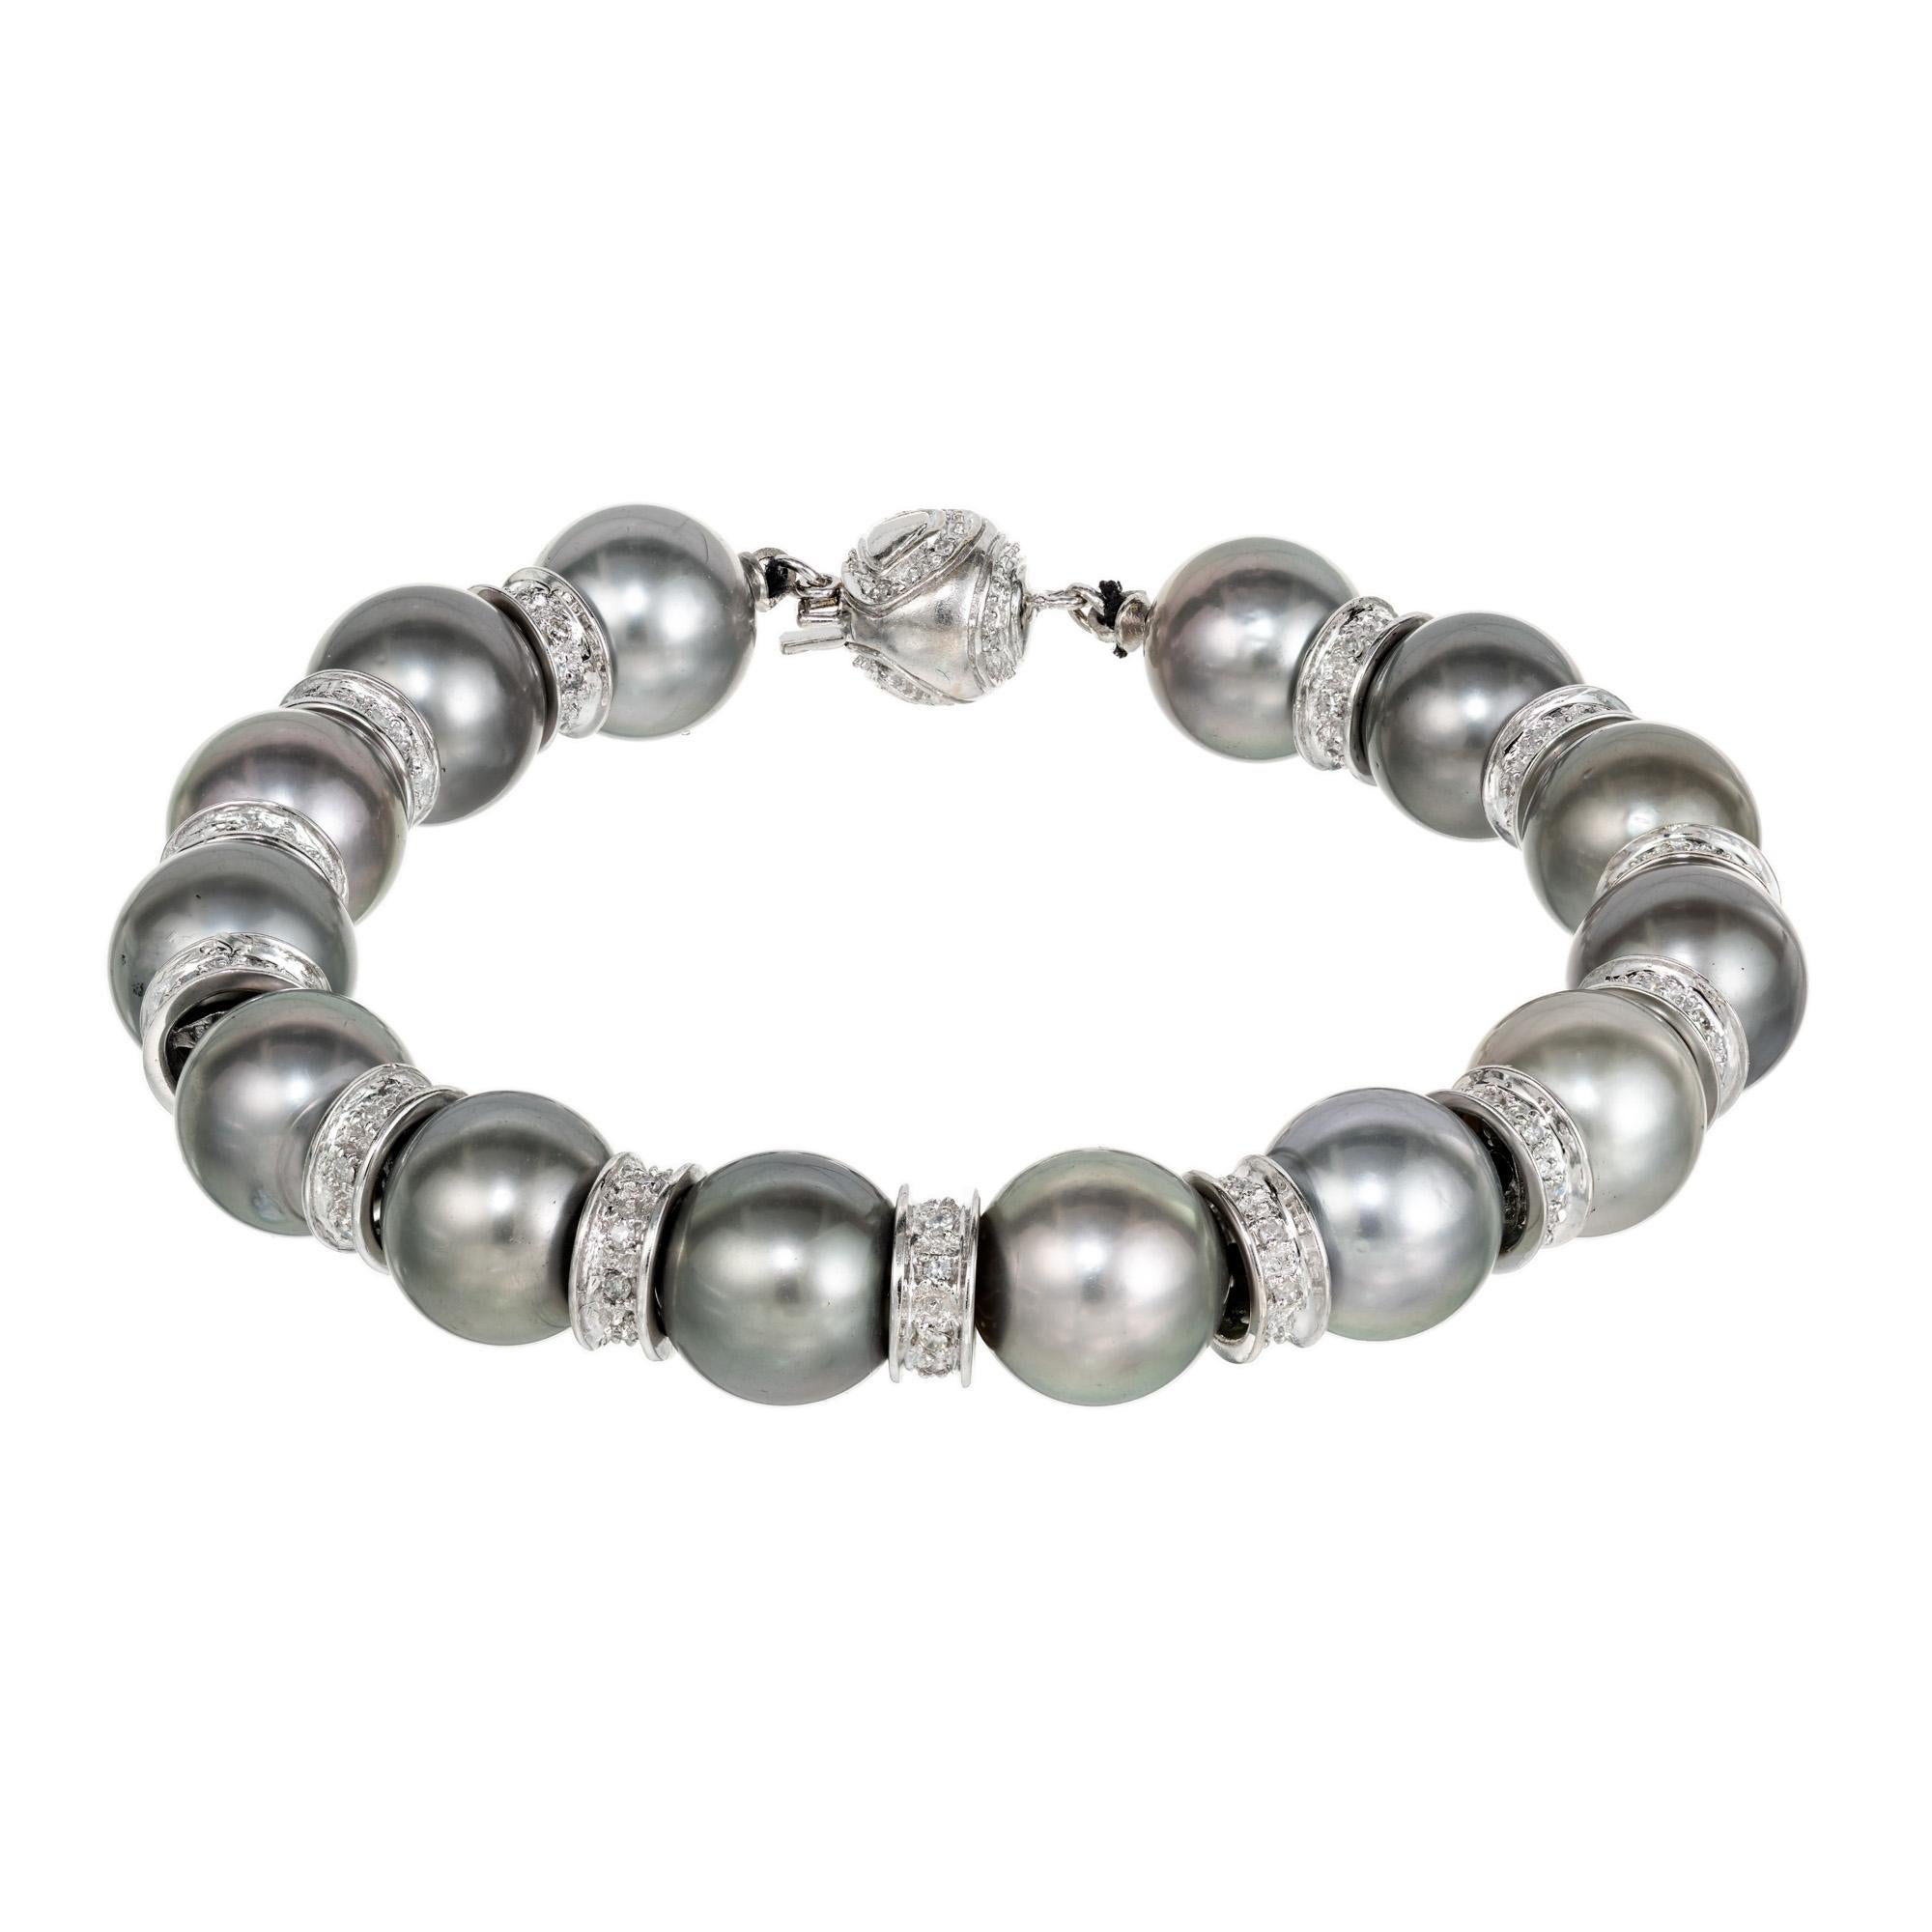 South sea pearl and diamond bracelet. 14 beautiful gray black South Sea 10mm Pearls have an exceptional rich a gray color. Separated by 14k white gold round spaces with 116 round cut diamonds including a 14k white gold diamond ball clasp. Fits a 7.5